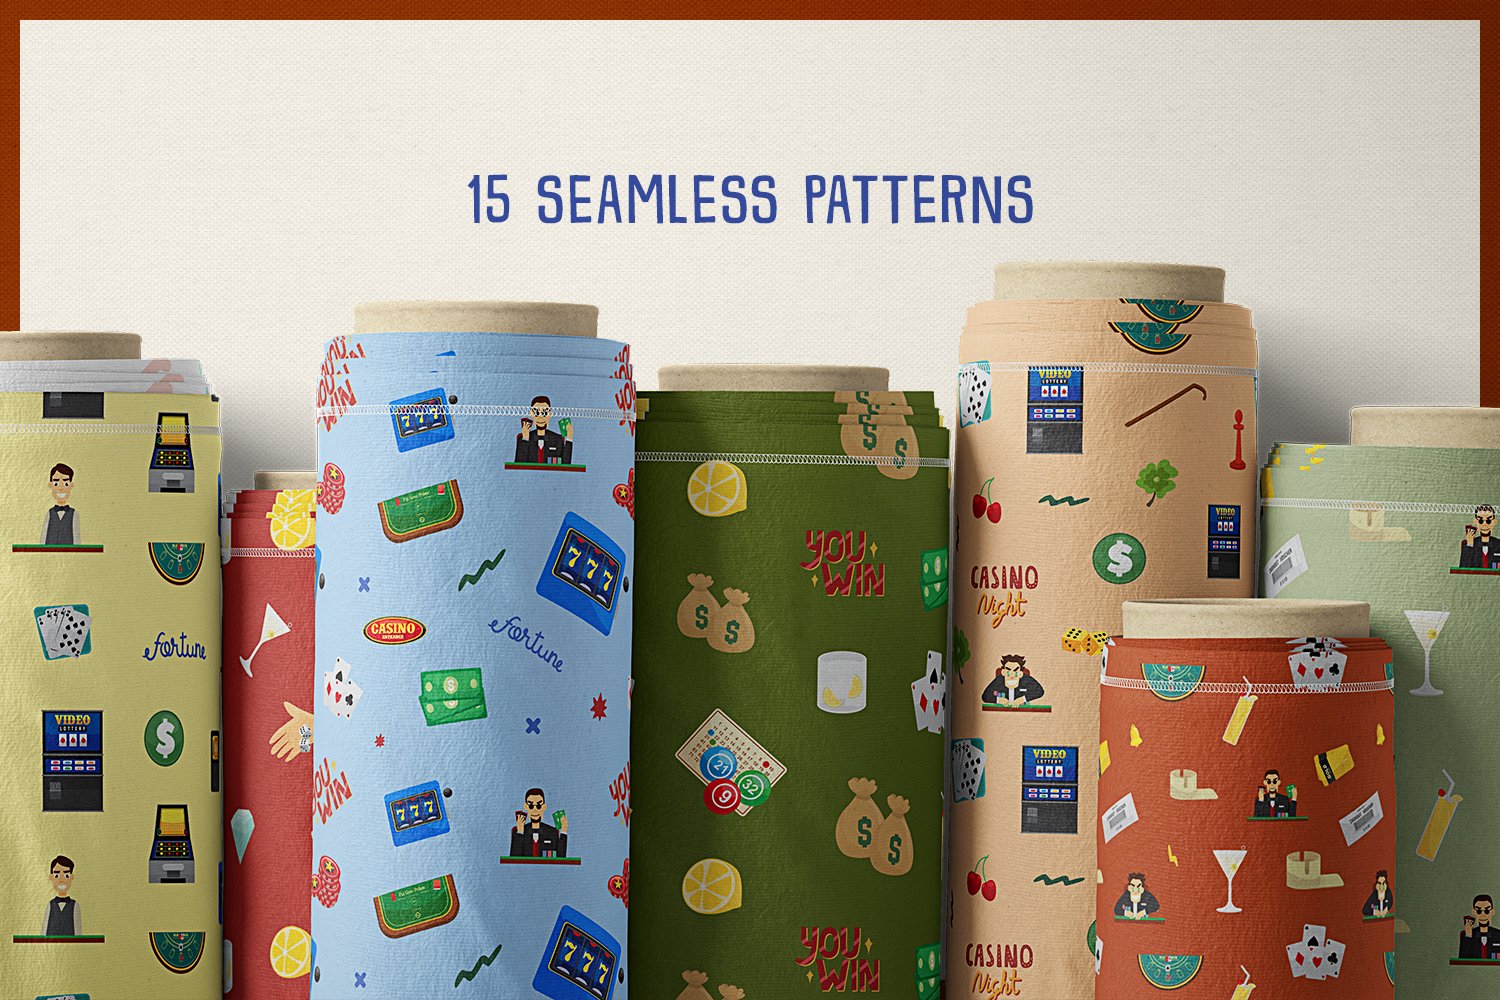 This set includes 15 seamless patterns.